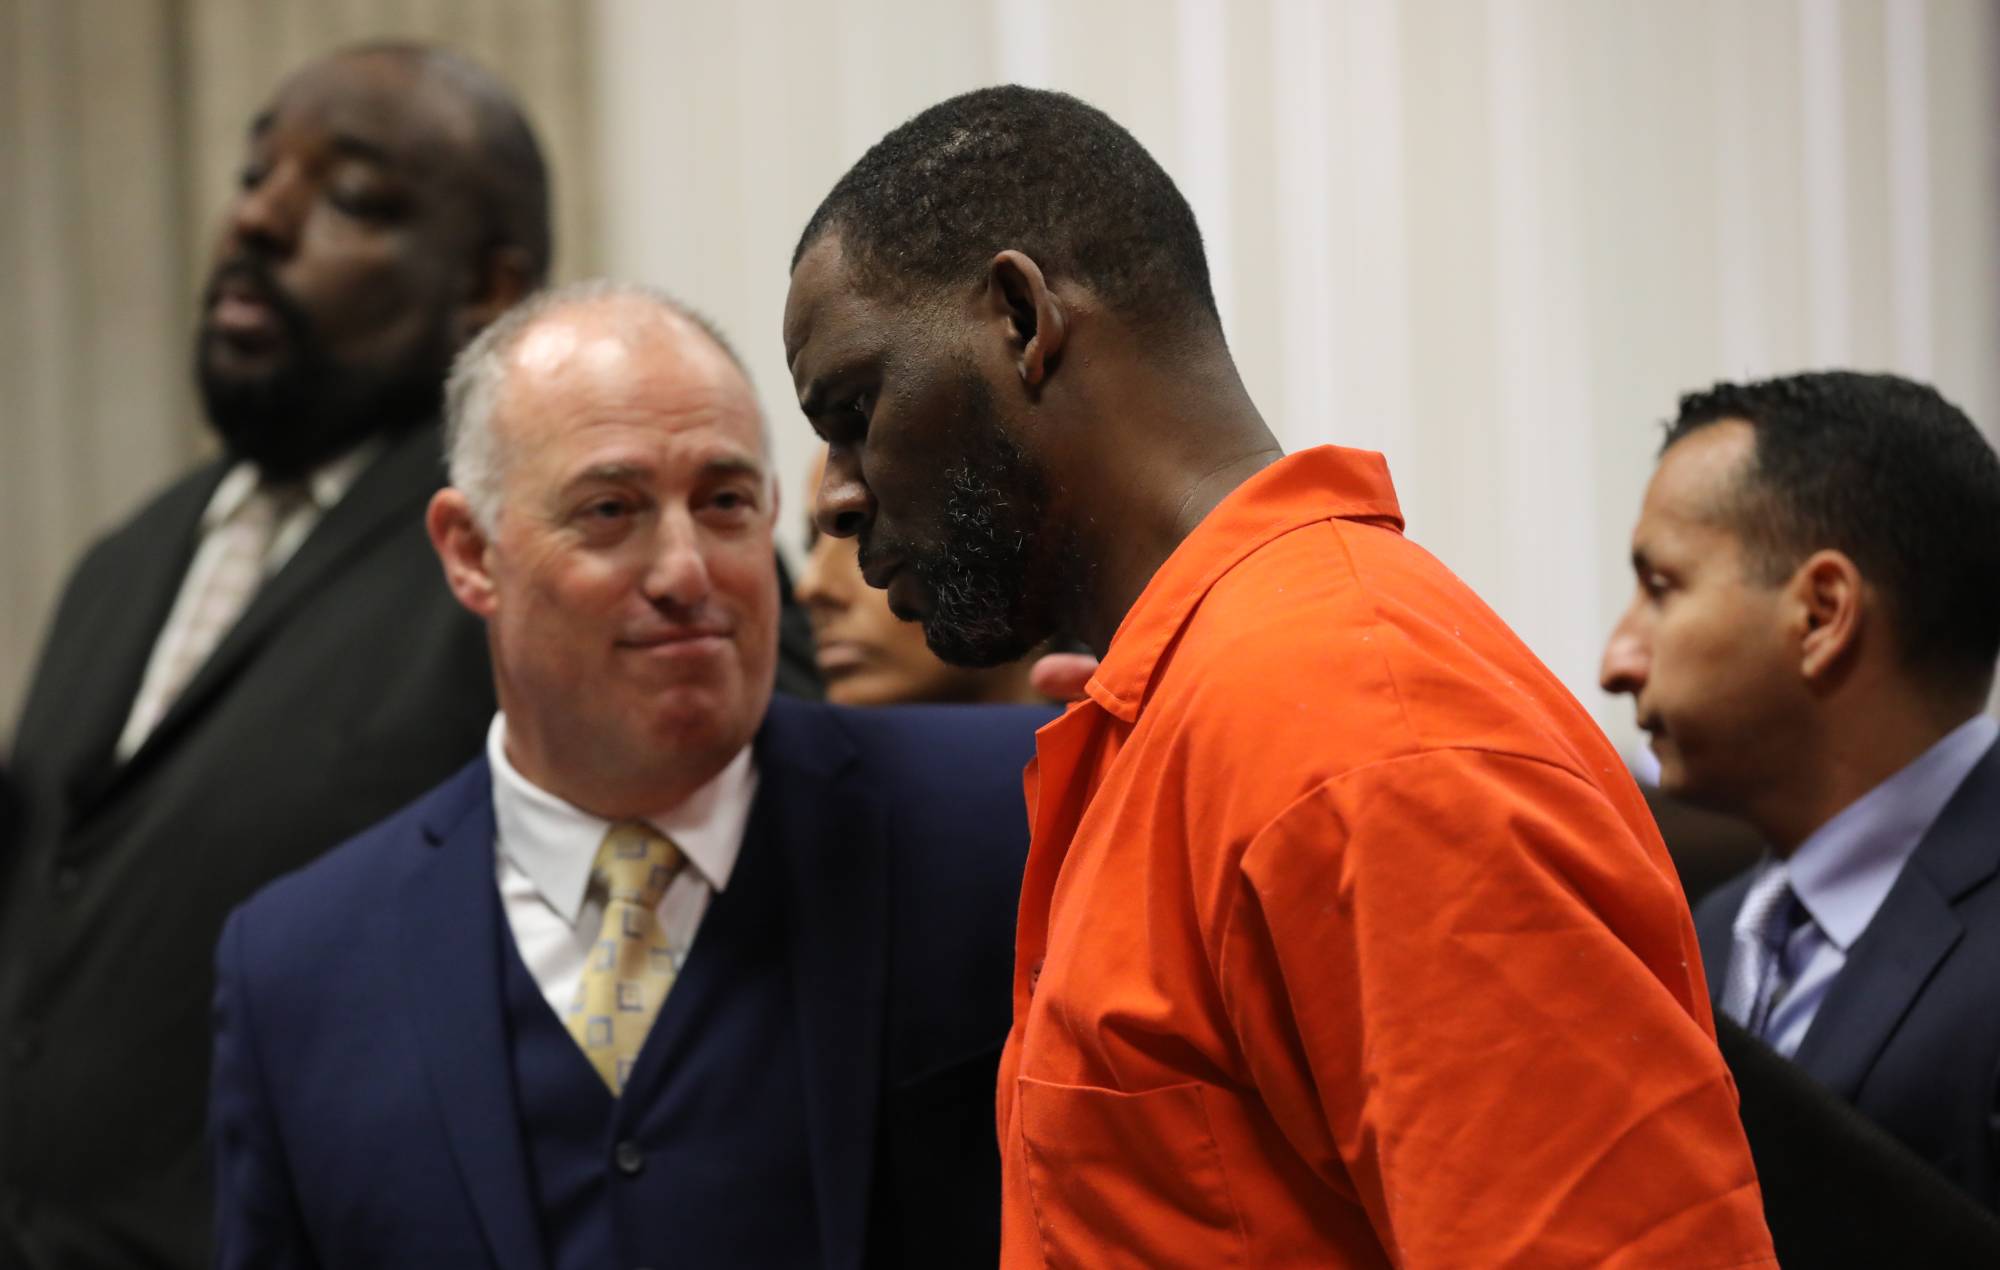 R Kelly American Singer Sentenced 10 Years In Prison? What Is He Convicted For?